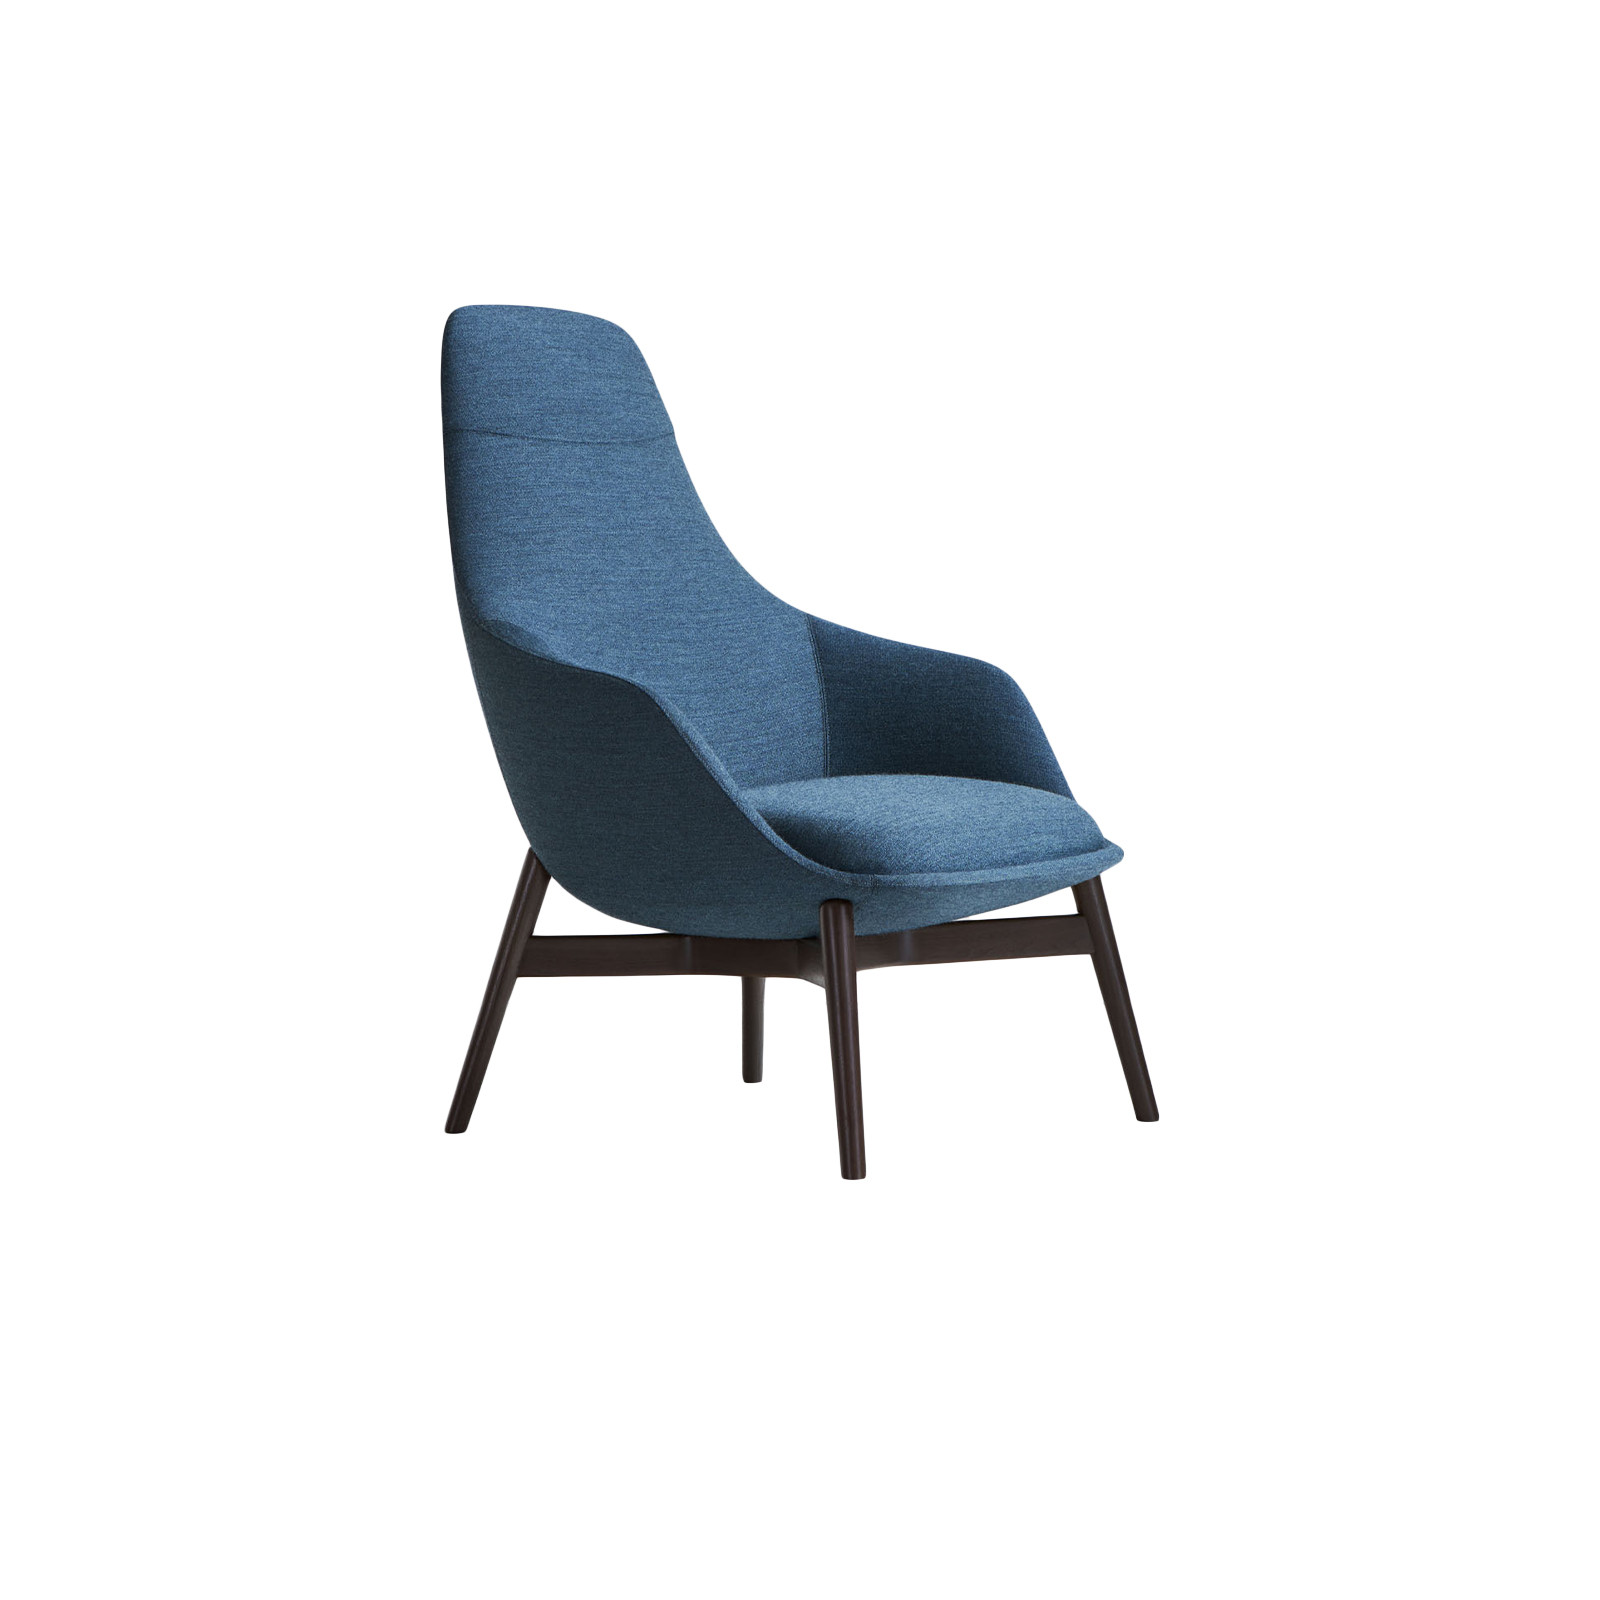 CANELLE LOUNGE CHAIR